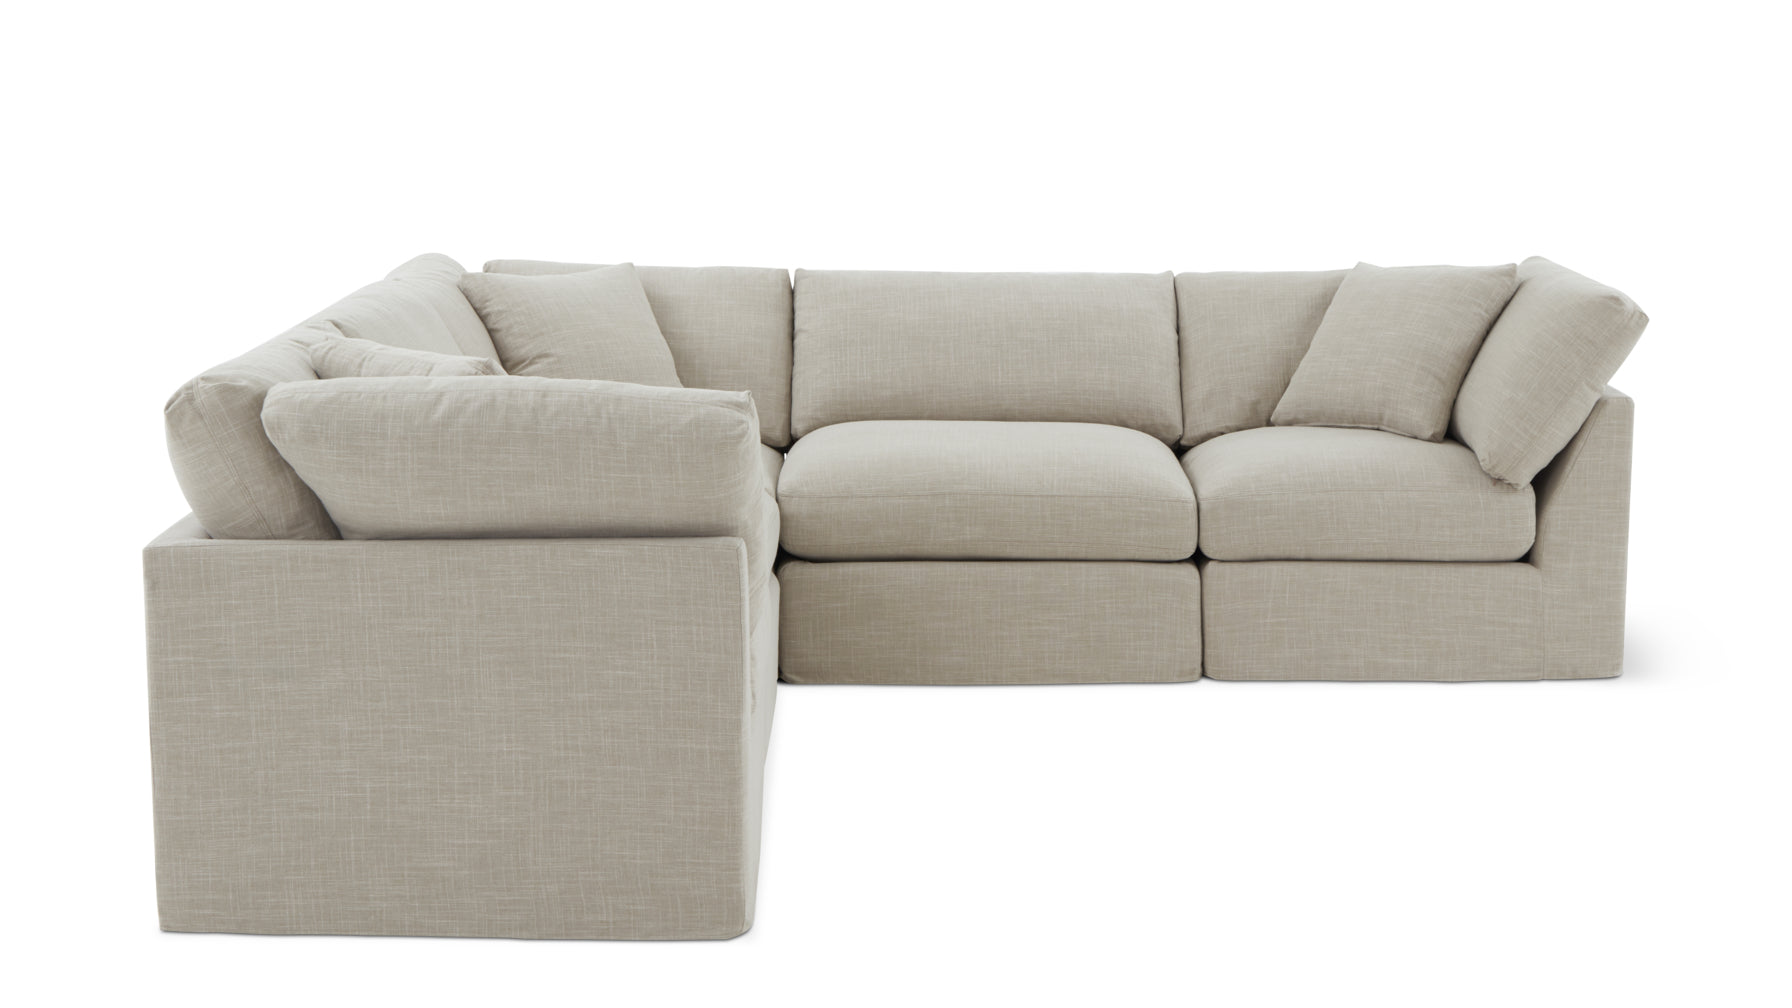 Get Together™ 5-Piece Modular Sectional Closed, Standard, Light Pebble - Image 1